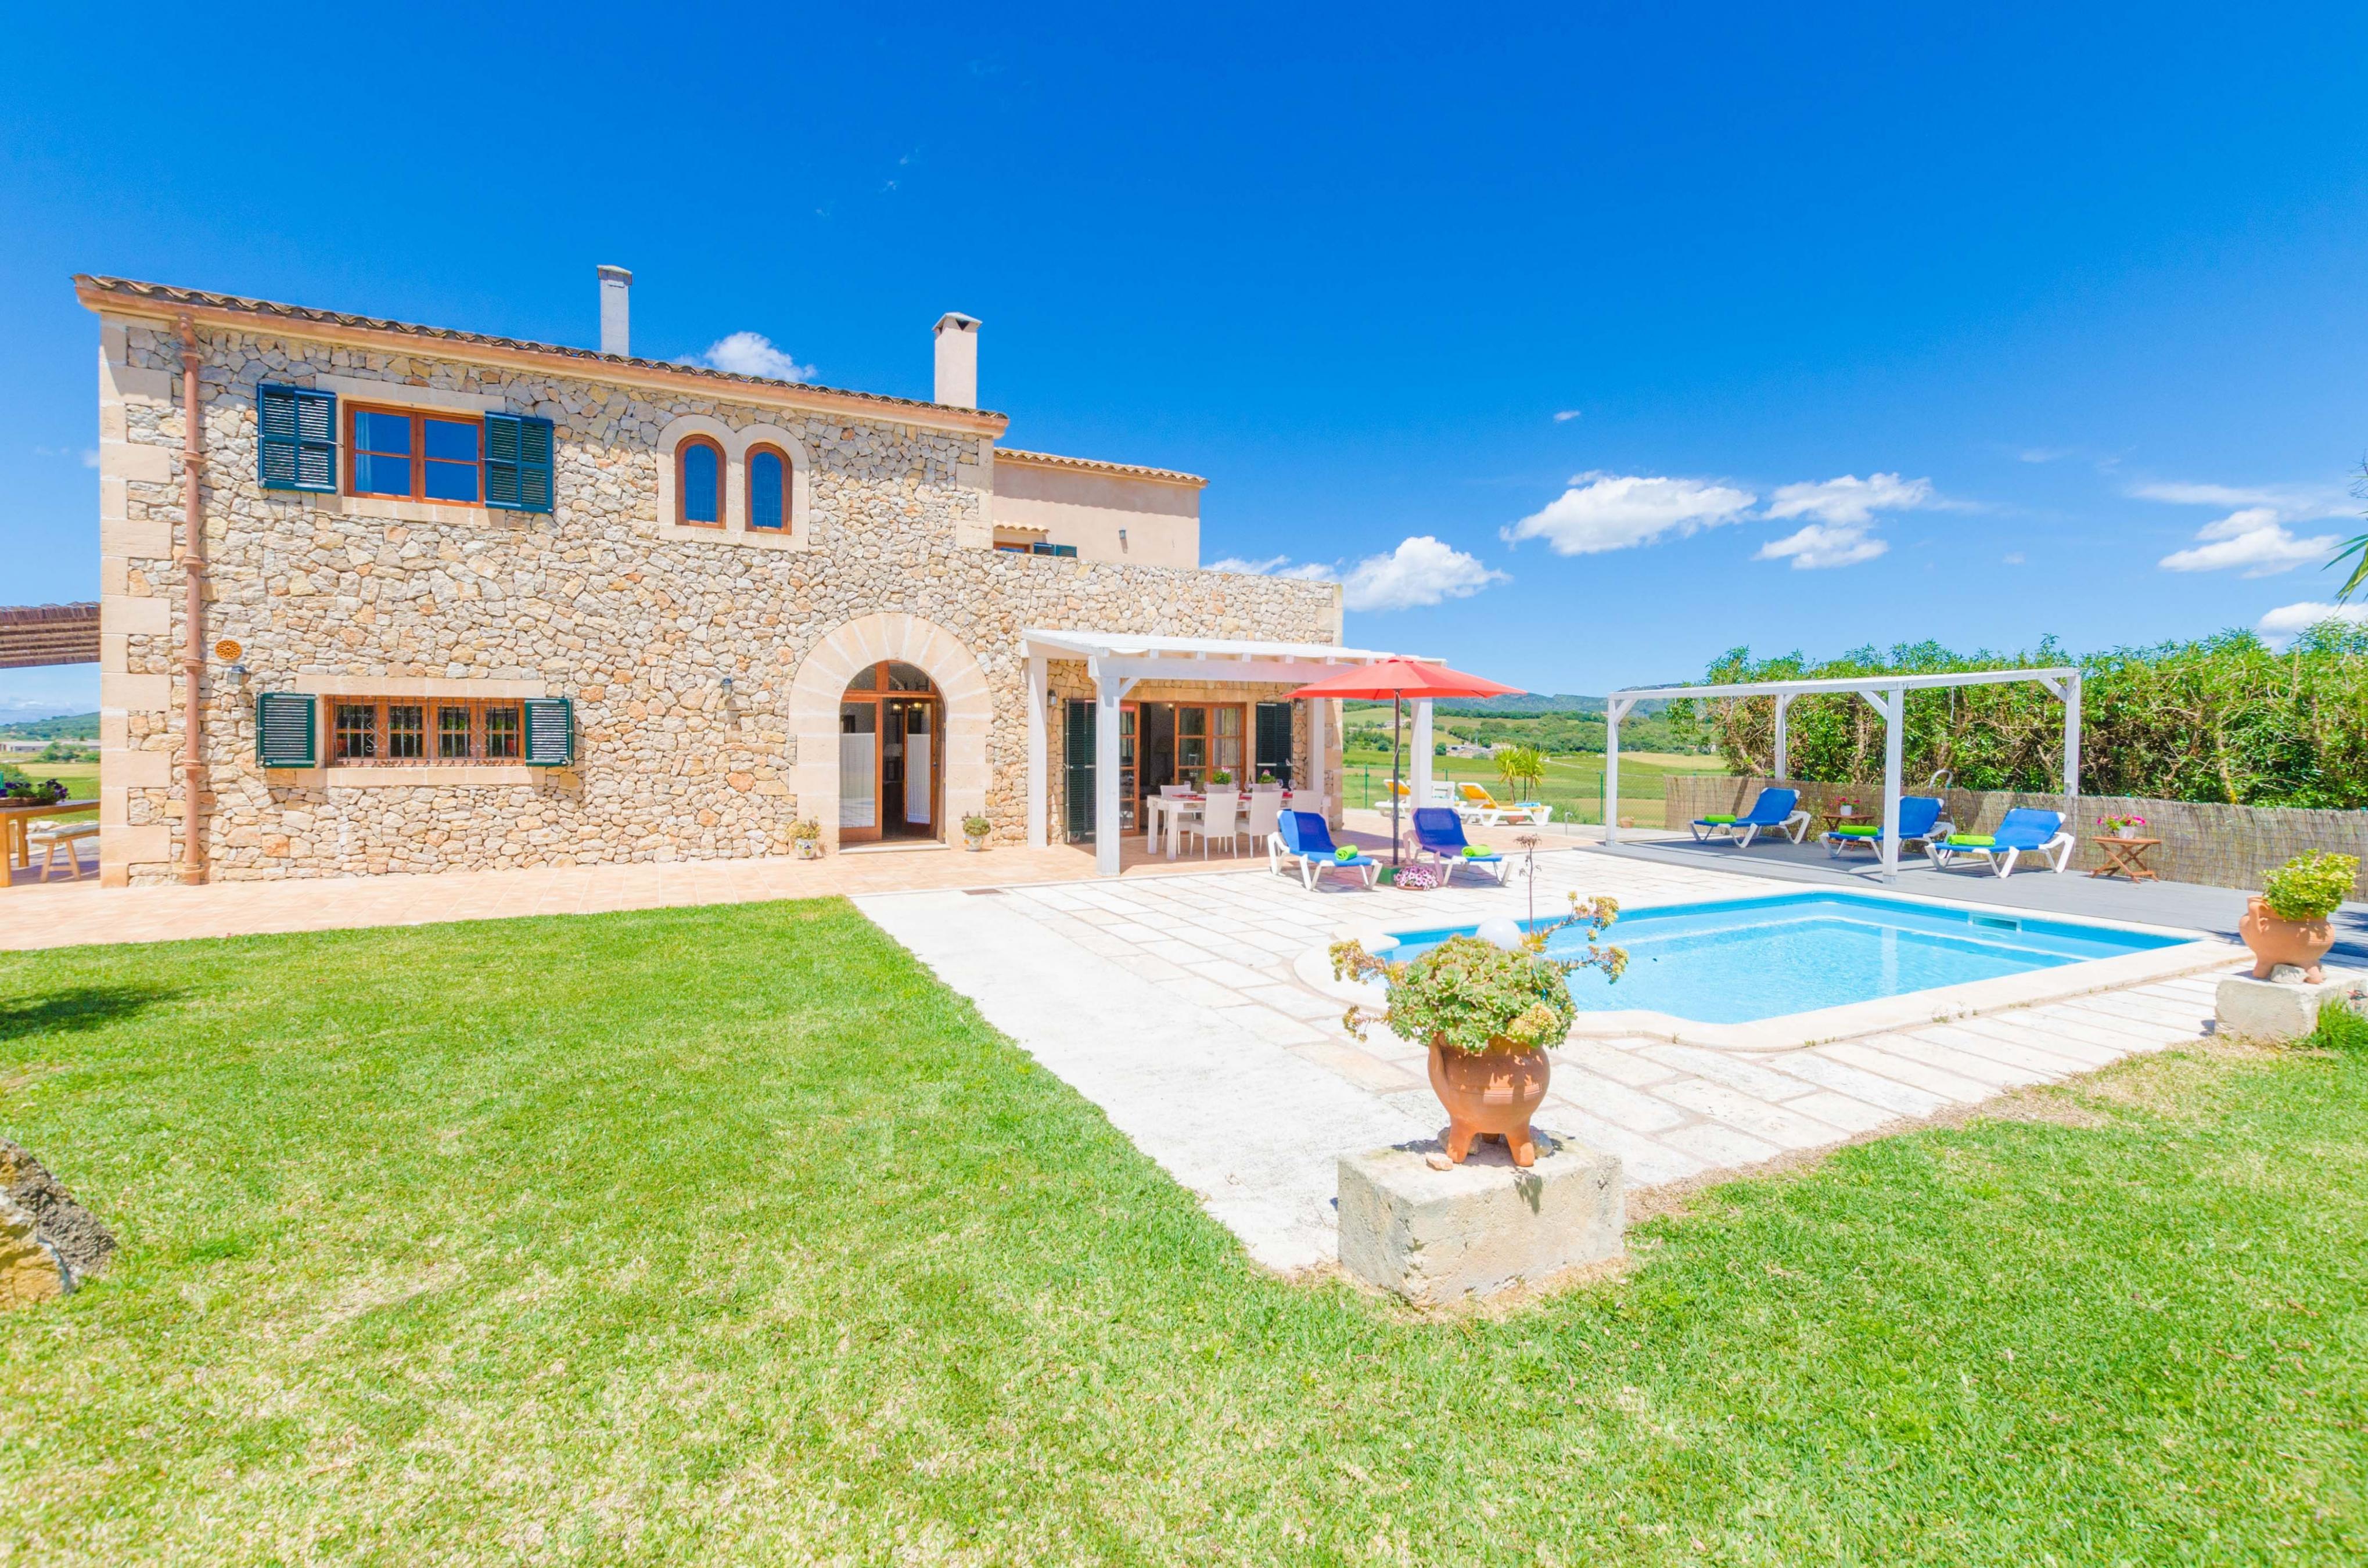 Property Image 1 - ANGIGAL - Spectacular villa with private pool in the tranquility of the countryside. Free WIFI.